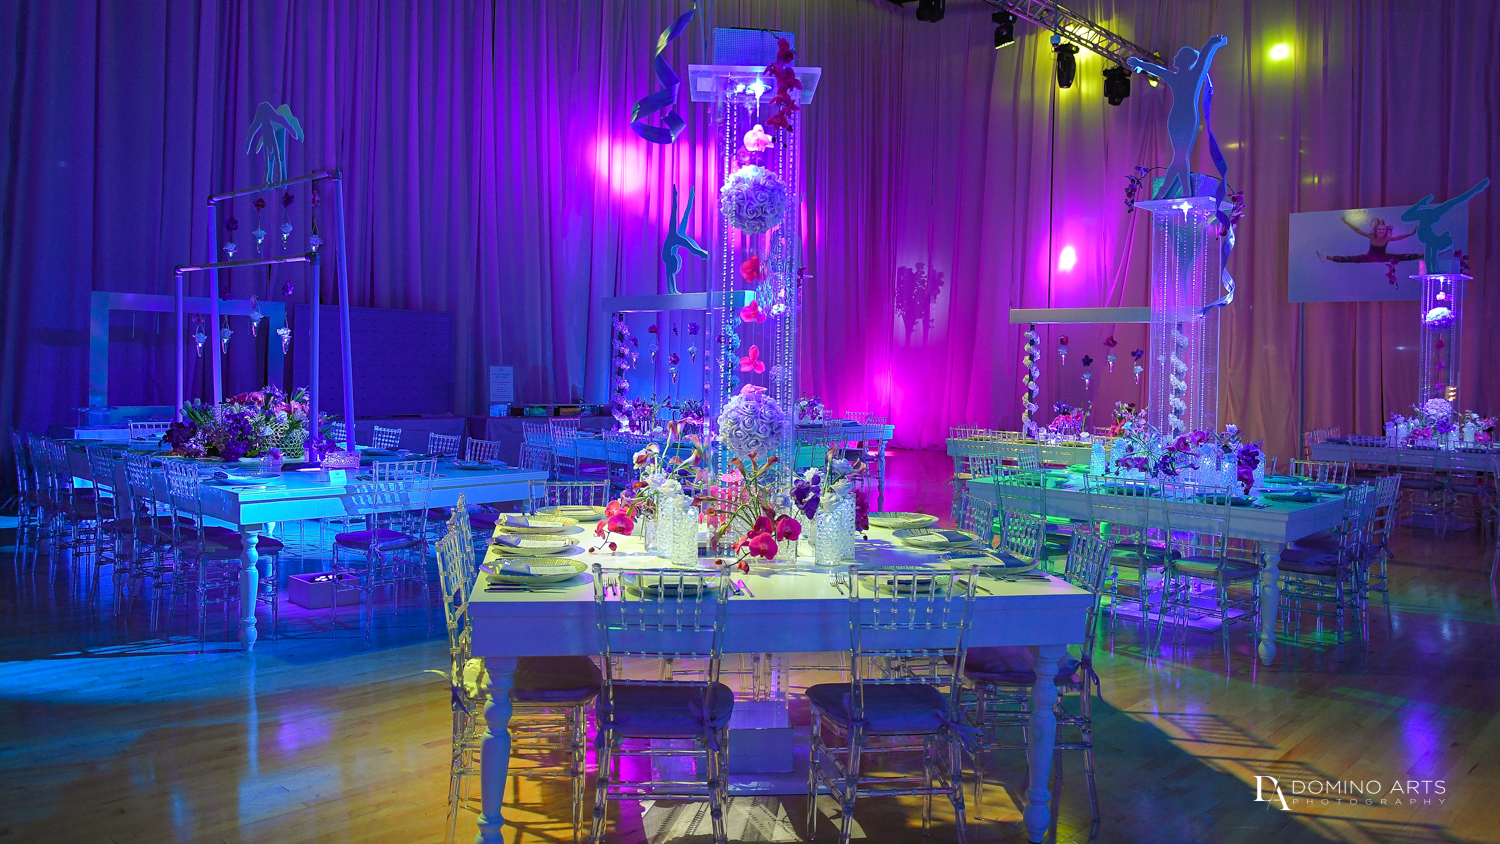 Table design for events by domino arts